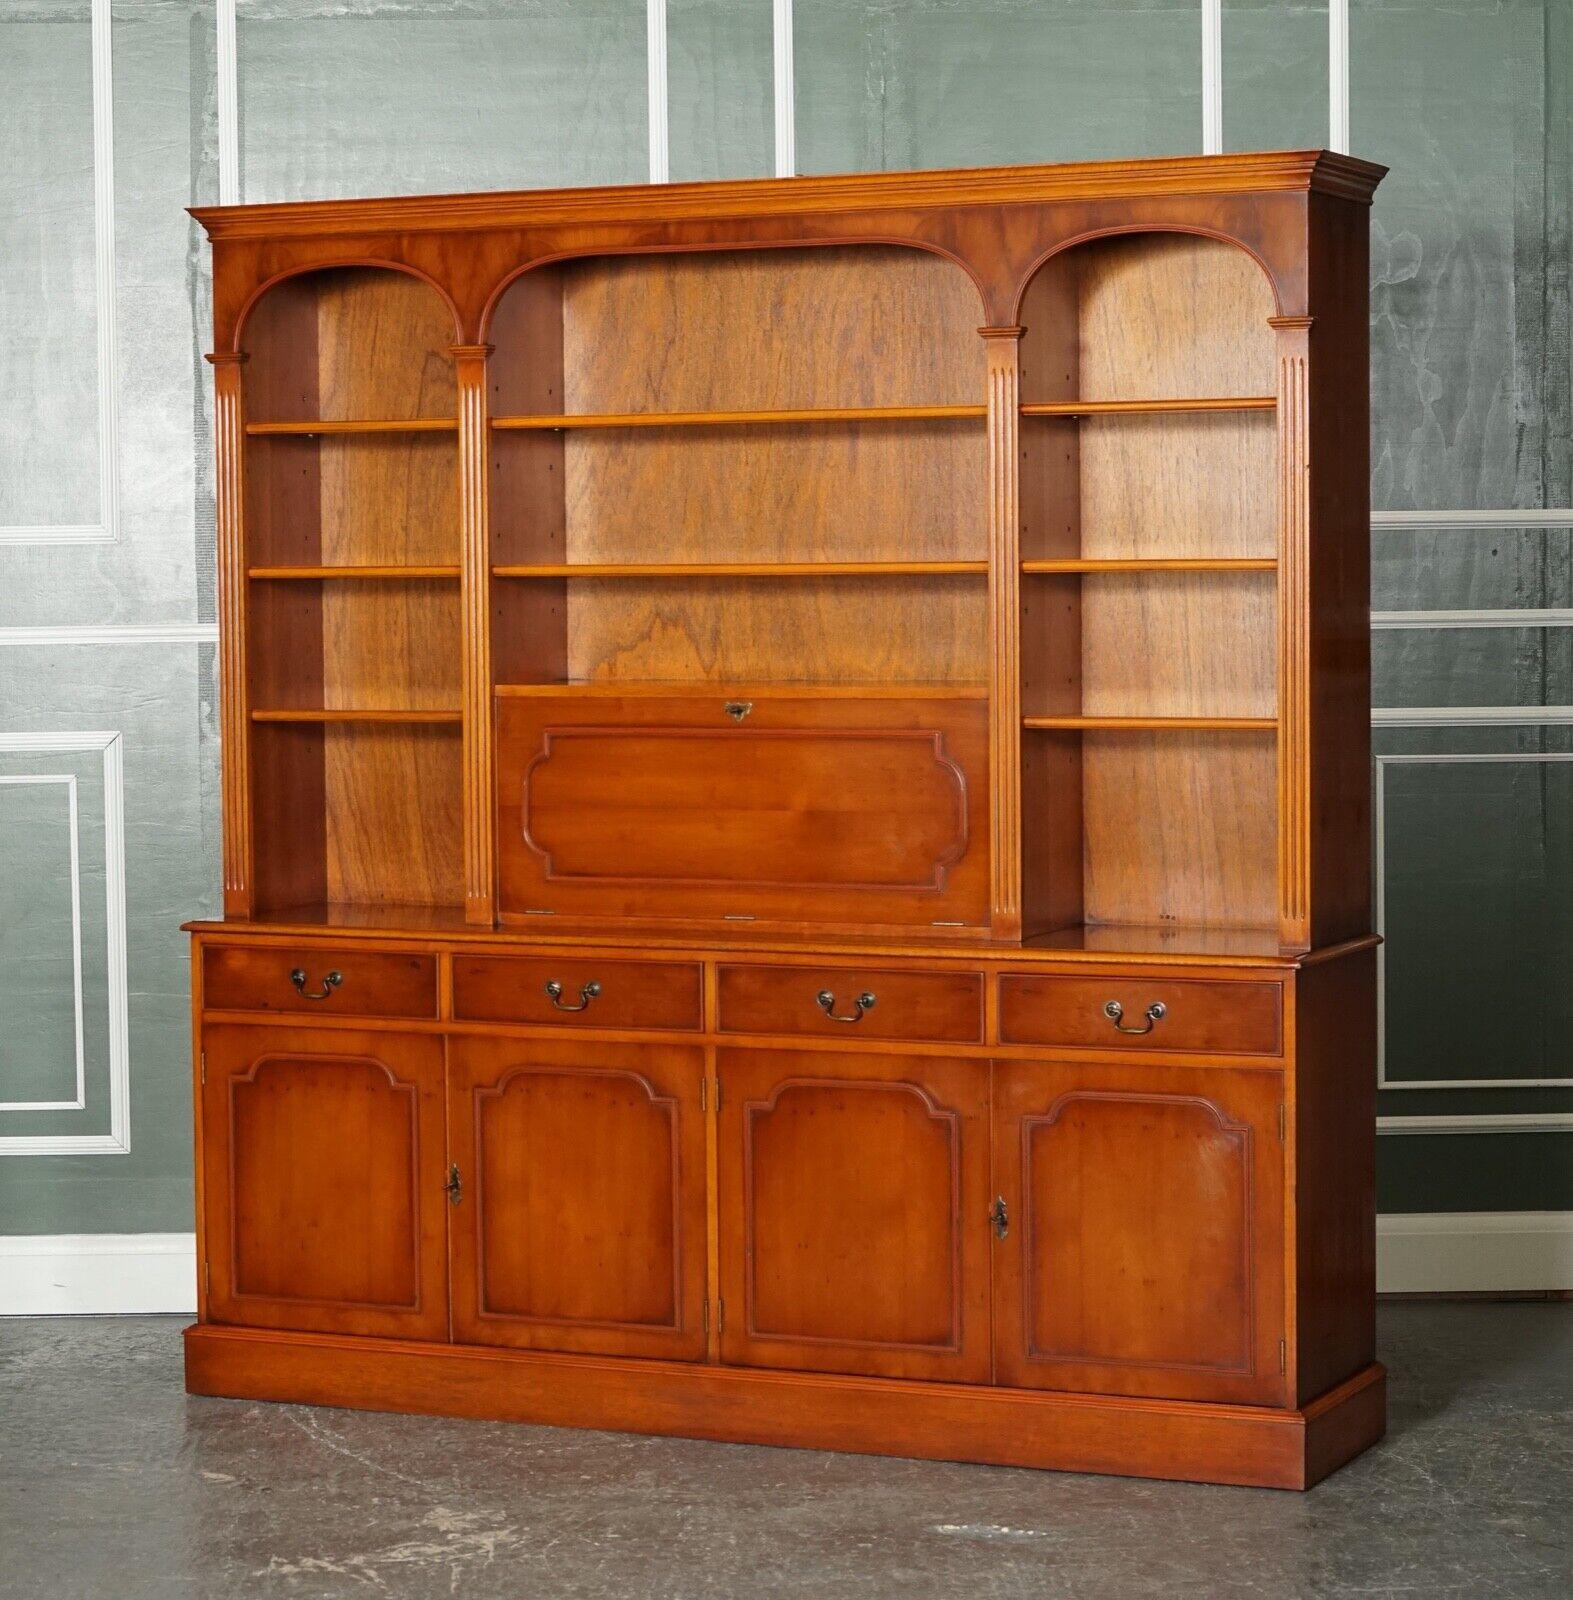 British Flamed Yew Wood Bradley England Bank Library Bookcase Cupboard with Lights For Sale